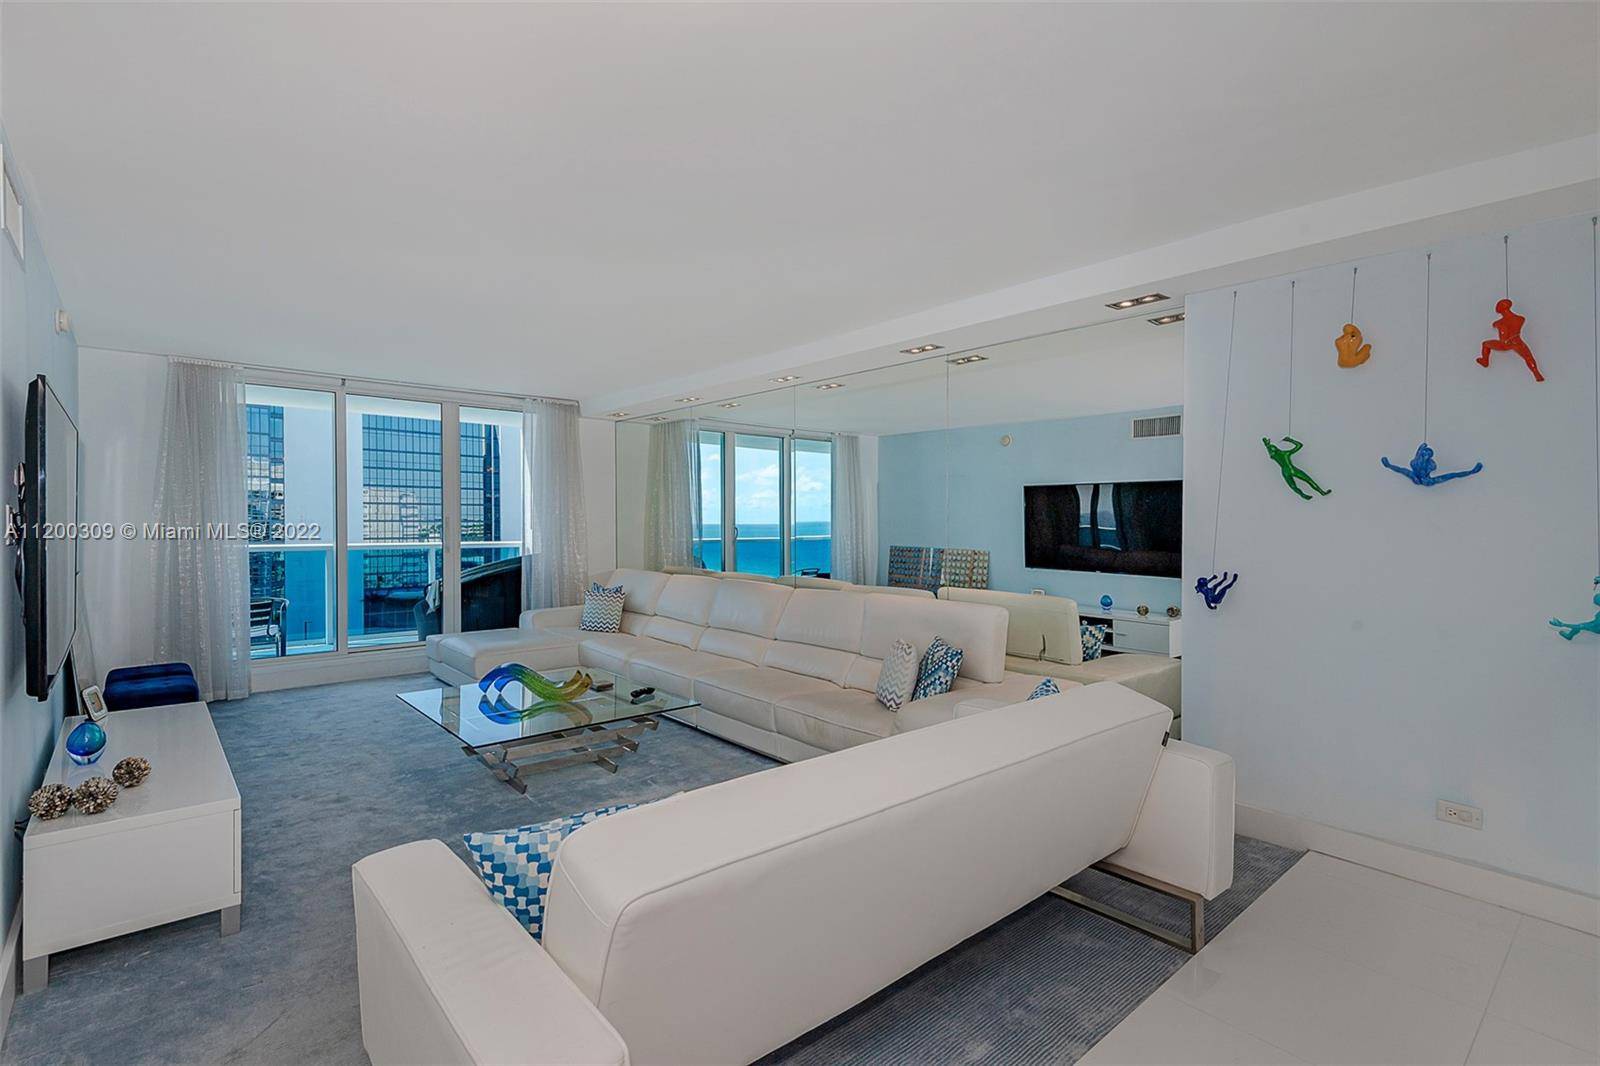 Gorgeous 2 bed, 2 bath ocean view residence inside one of South Beach s premier luxury resorts.